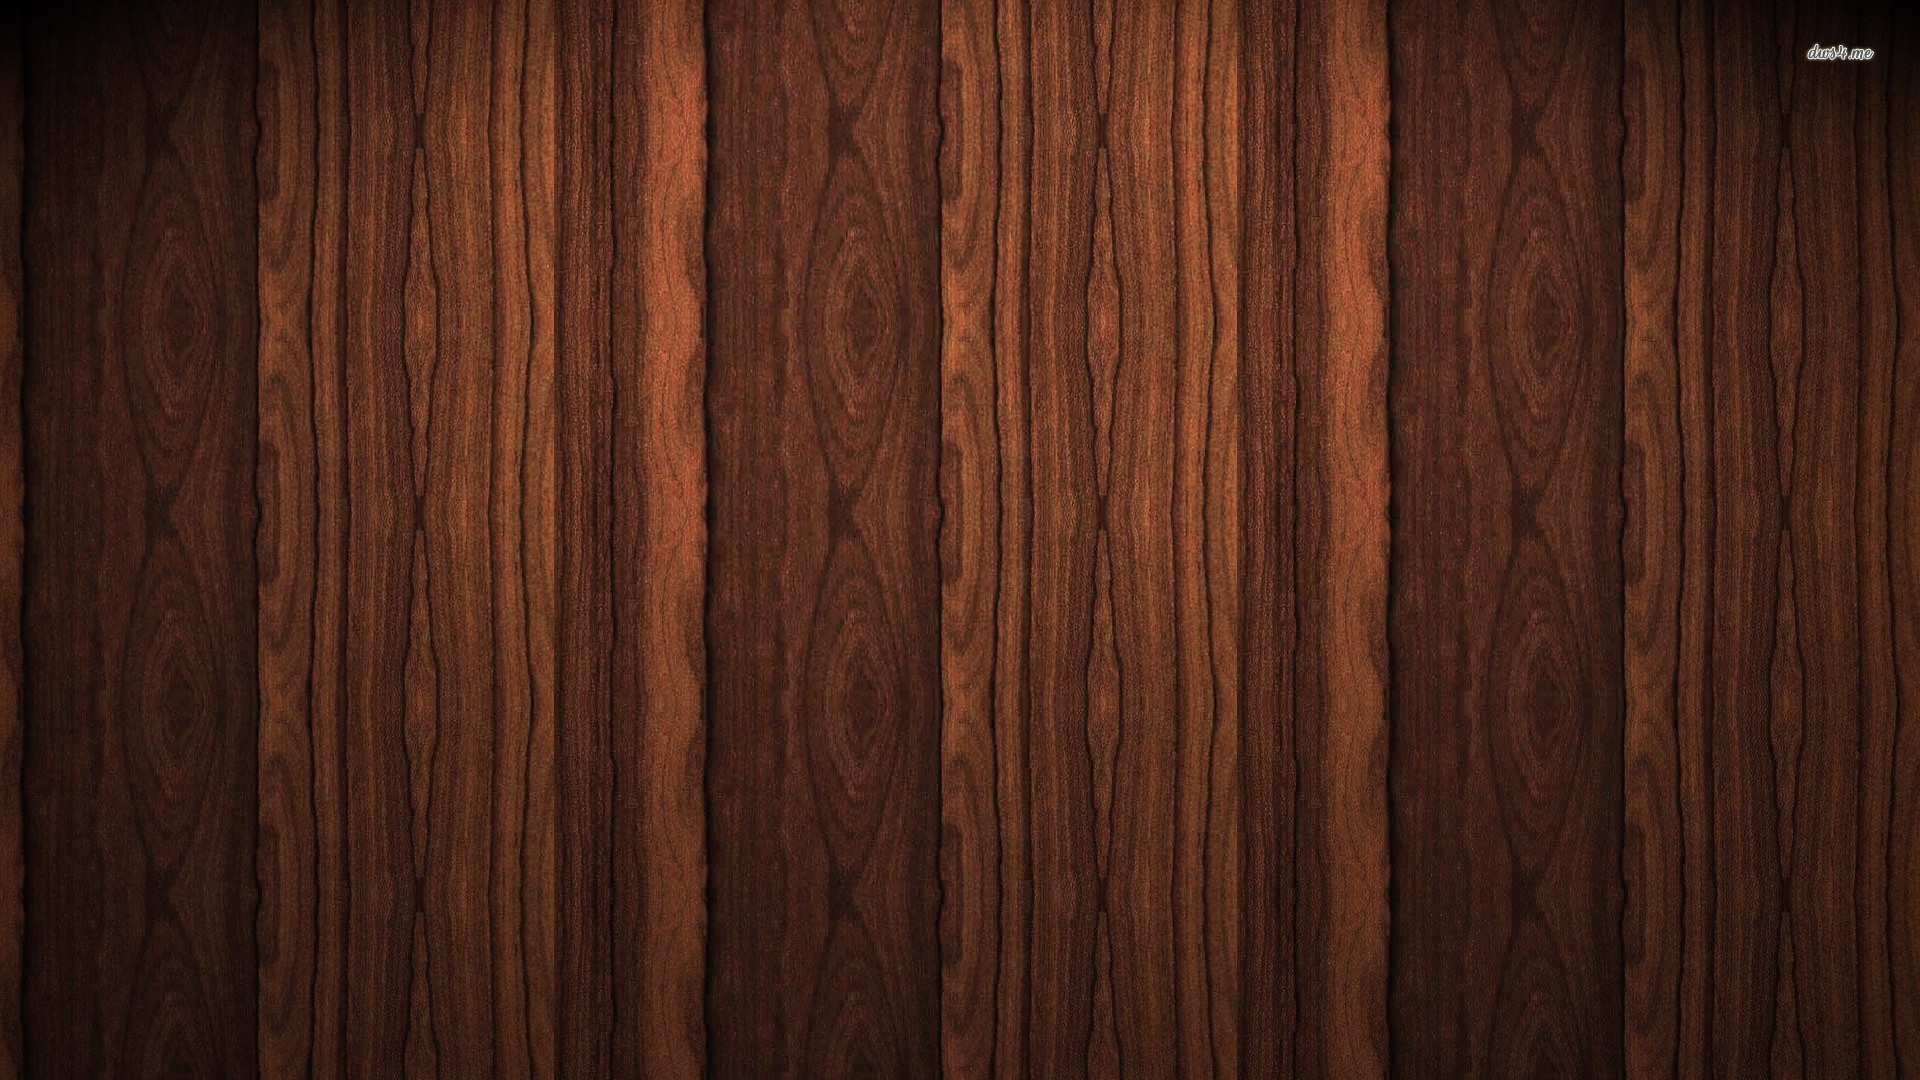 Wood texture wallpaper - Abstract wallpapers - #15472